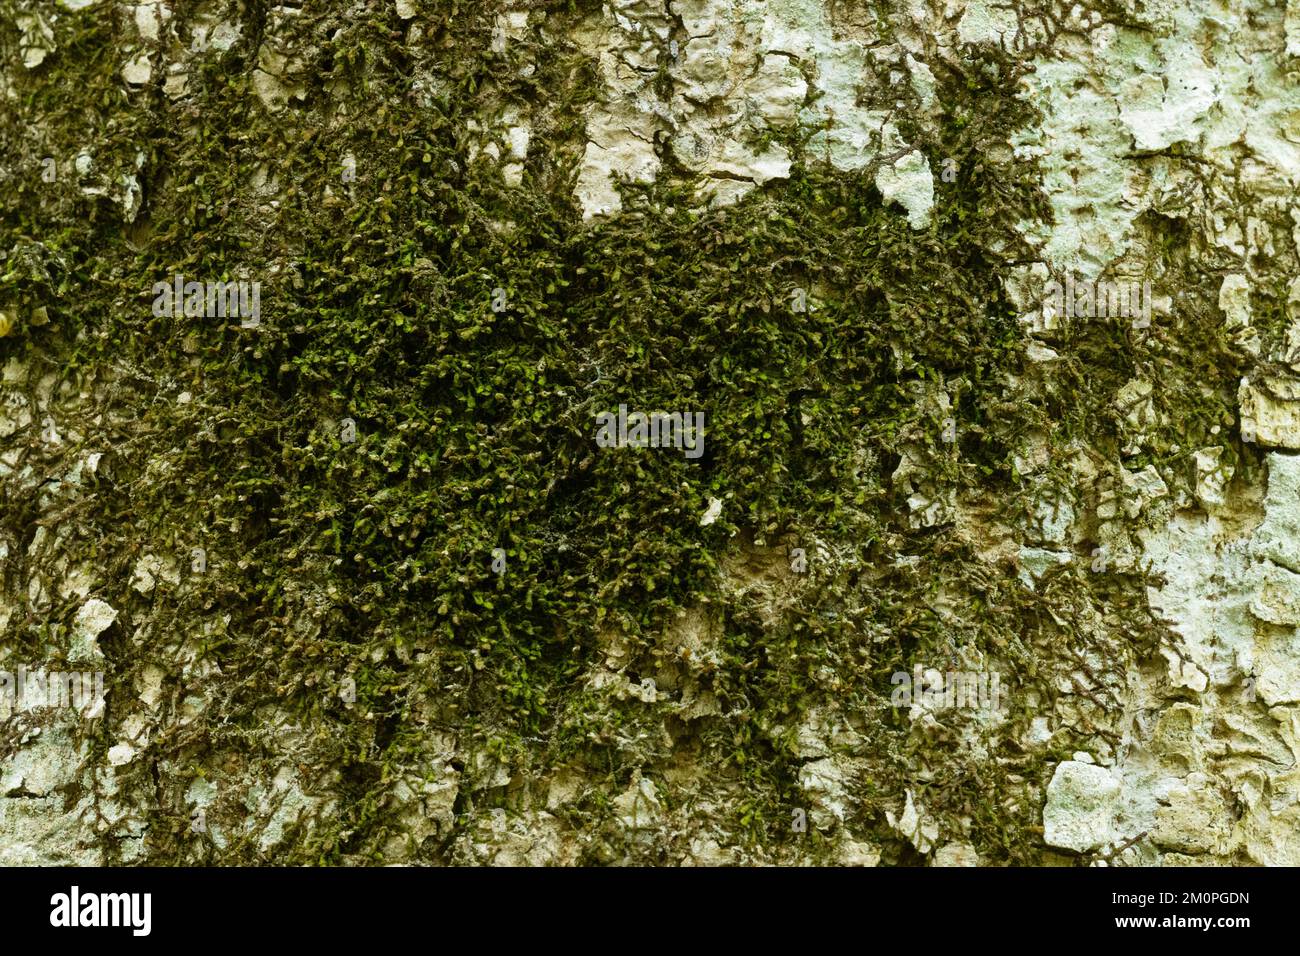 A close-up of a species of liverwort, the Dilated scalewort growing on a broadleaved tree trunk in an old-growth forest in Latvia, Europe Stock Photo